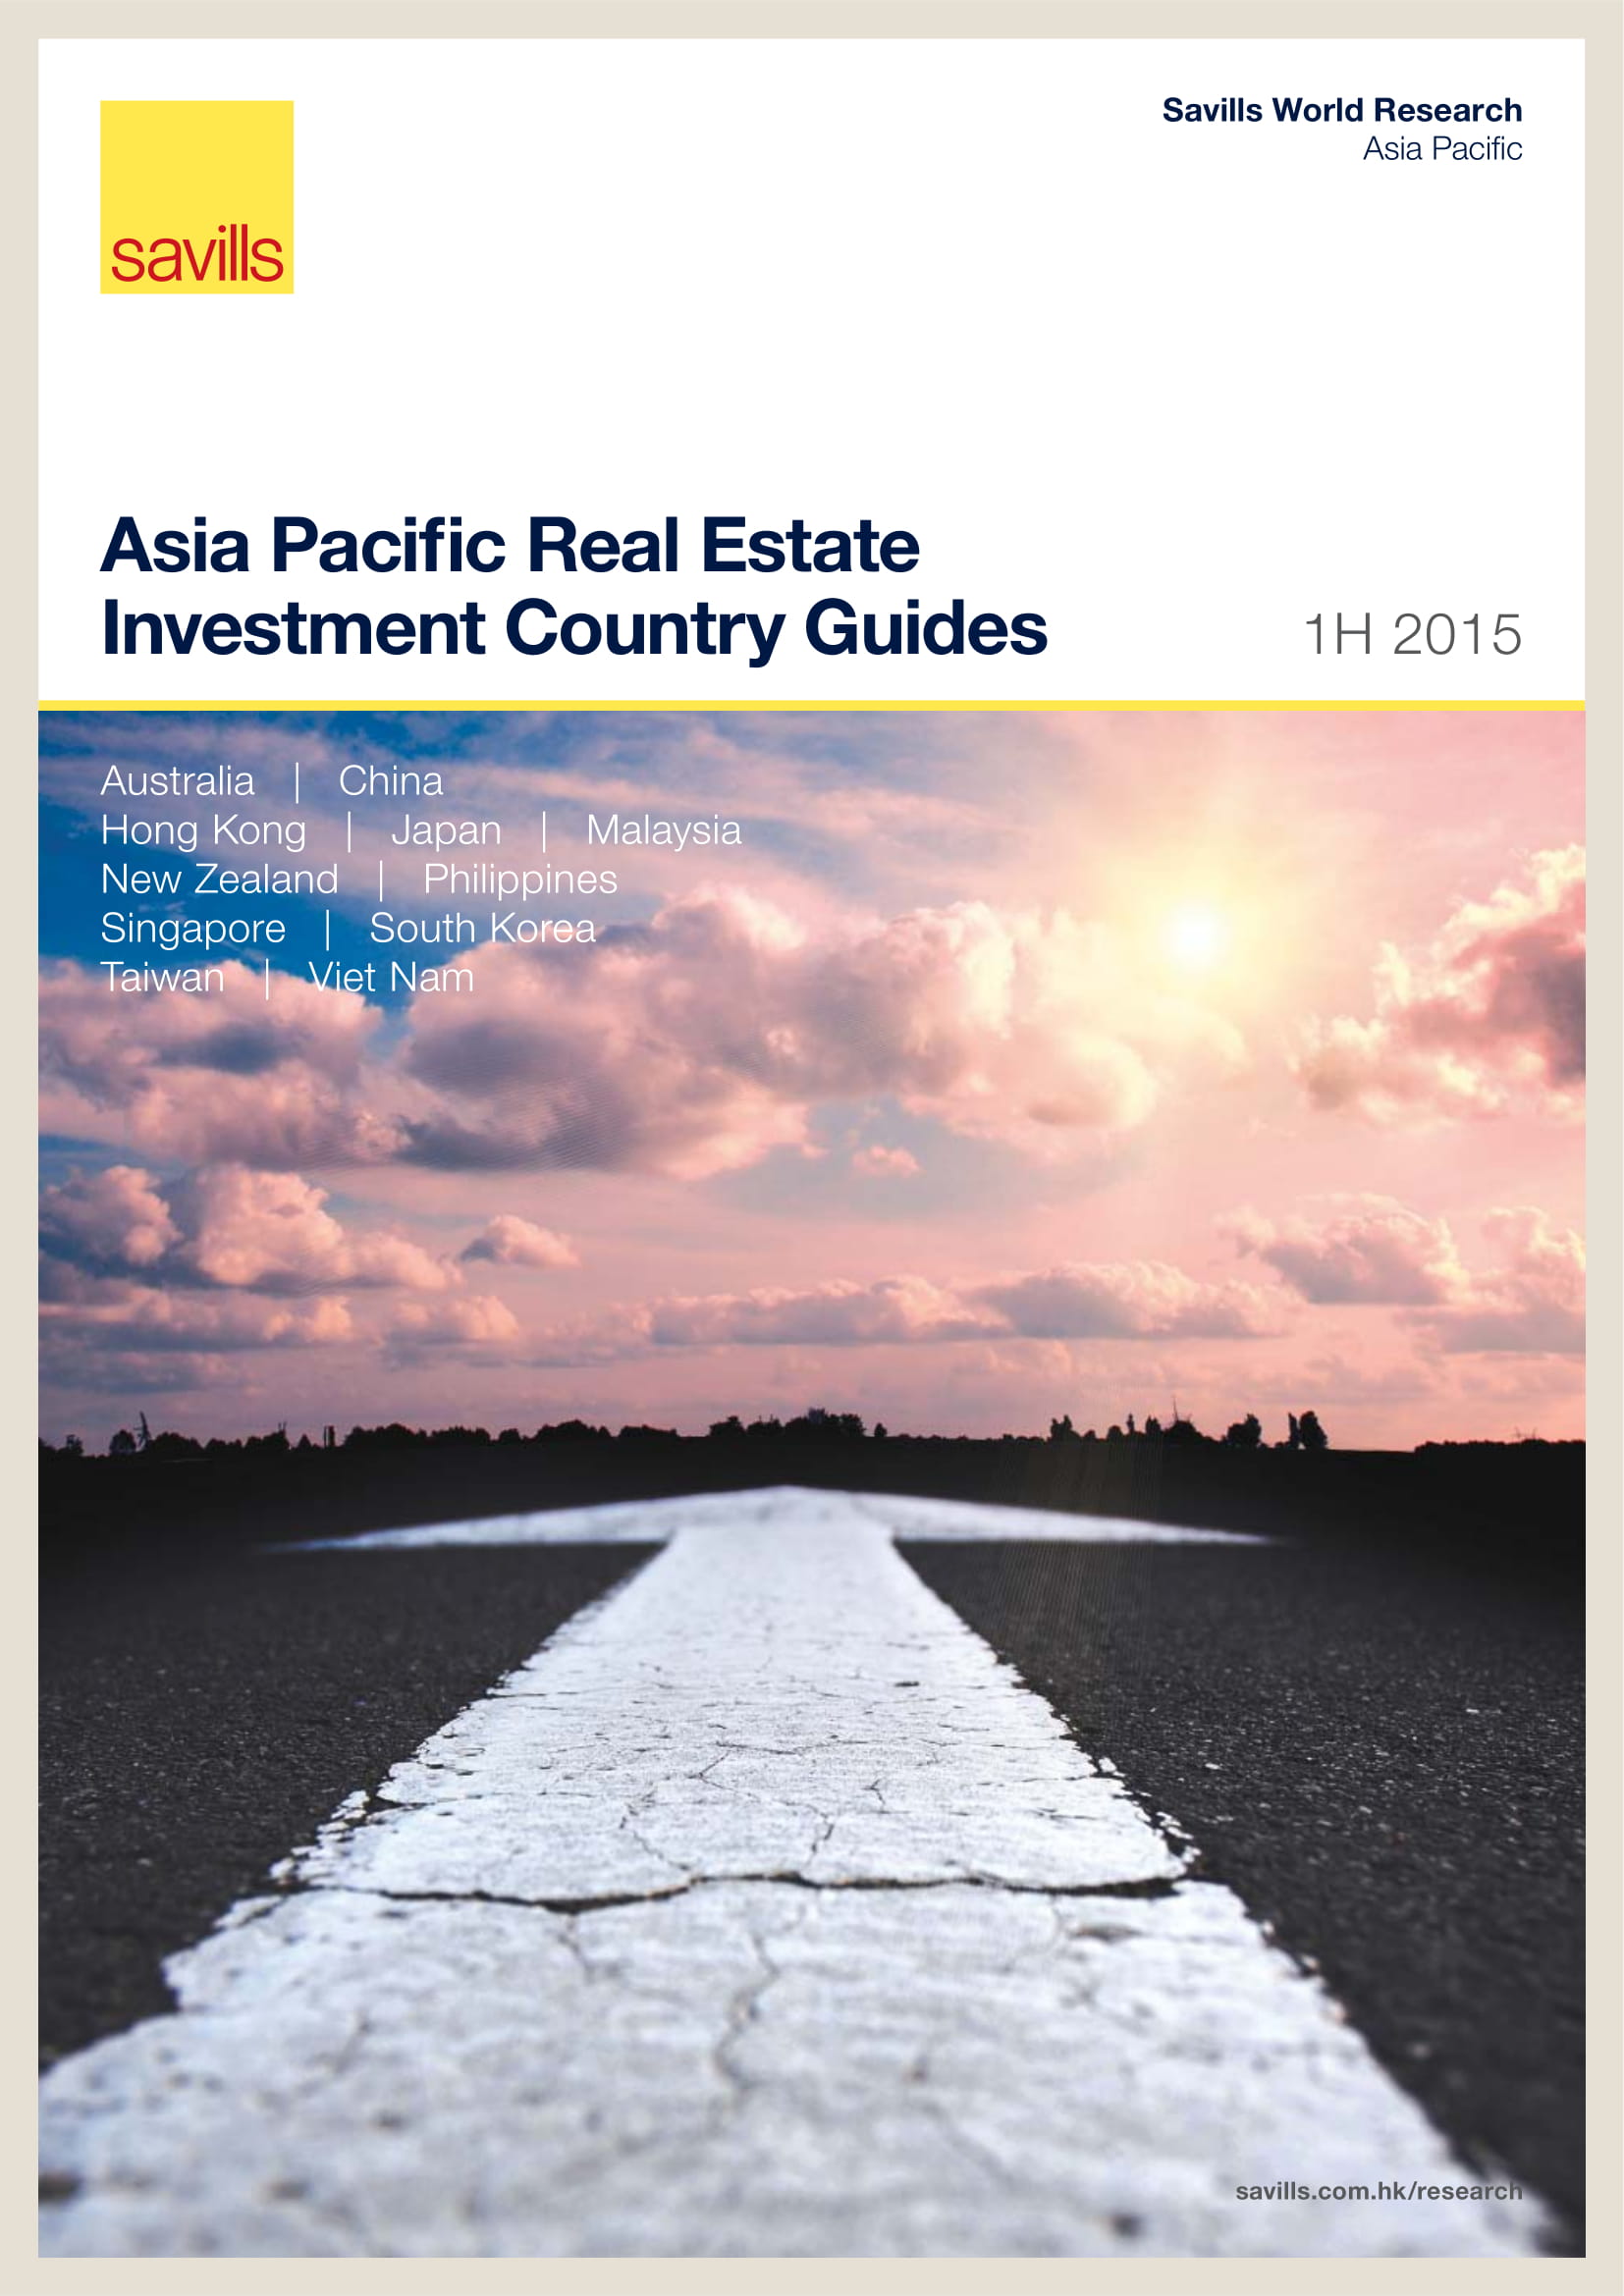 Asia Pacific Real Estate Investment Country Guides 1H 2015